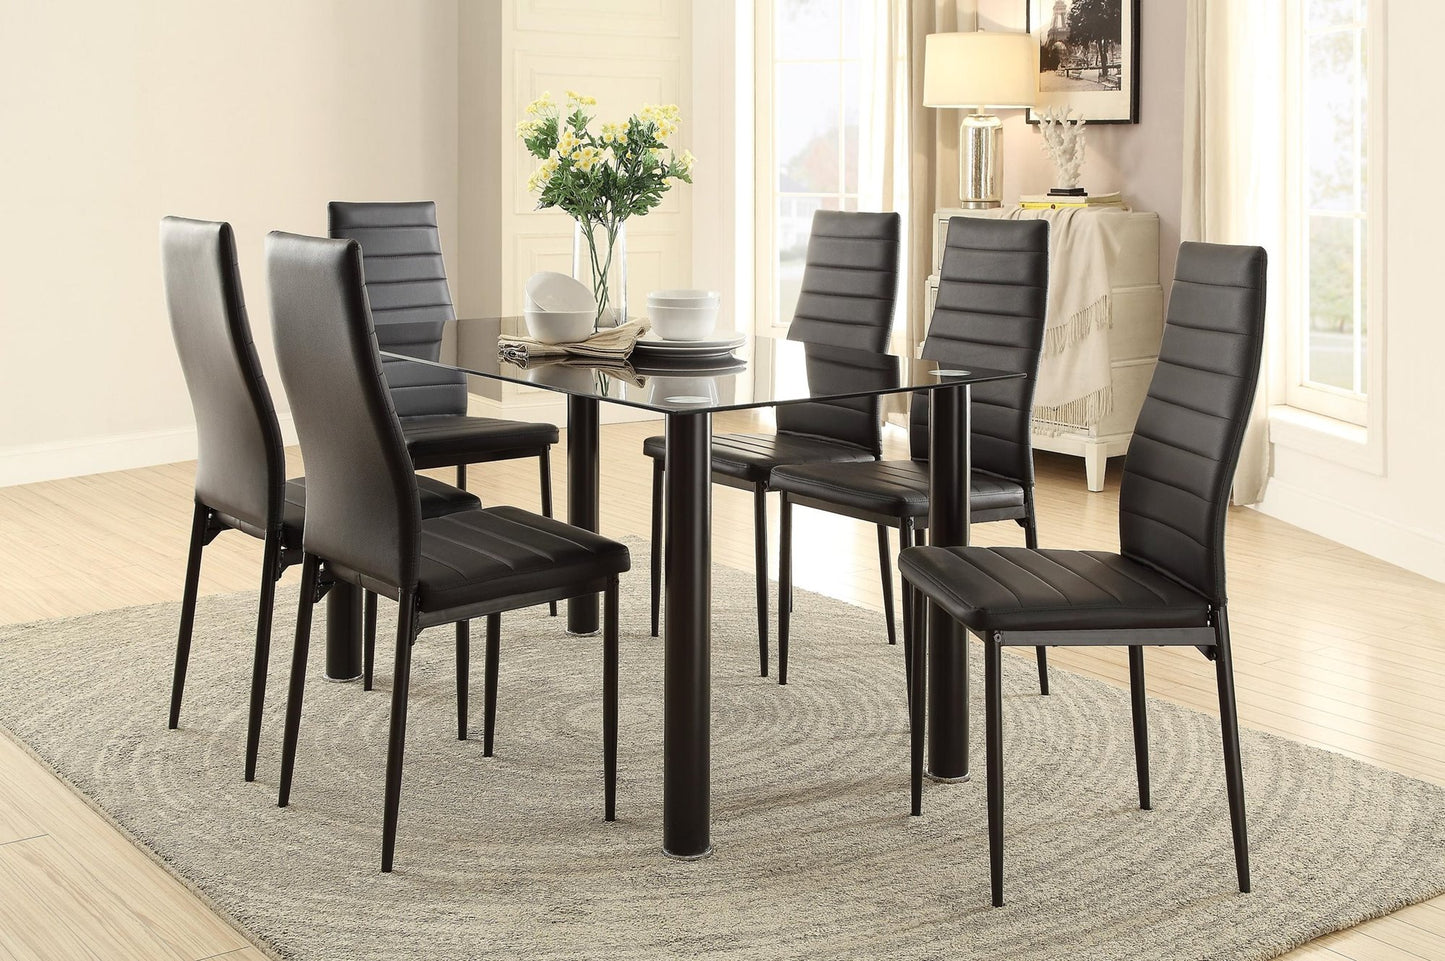 Homelegance Florian 4 Dining Side Chair in Black Leatherette